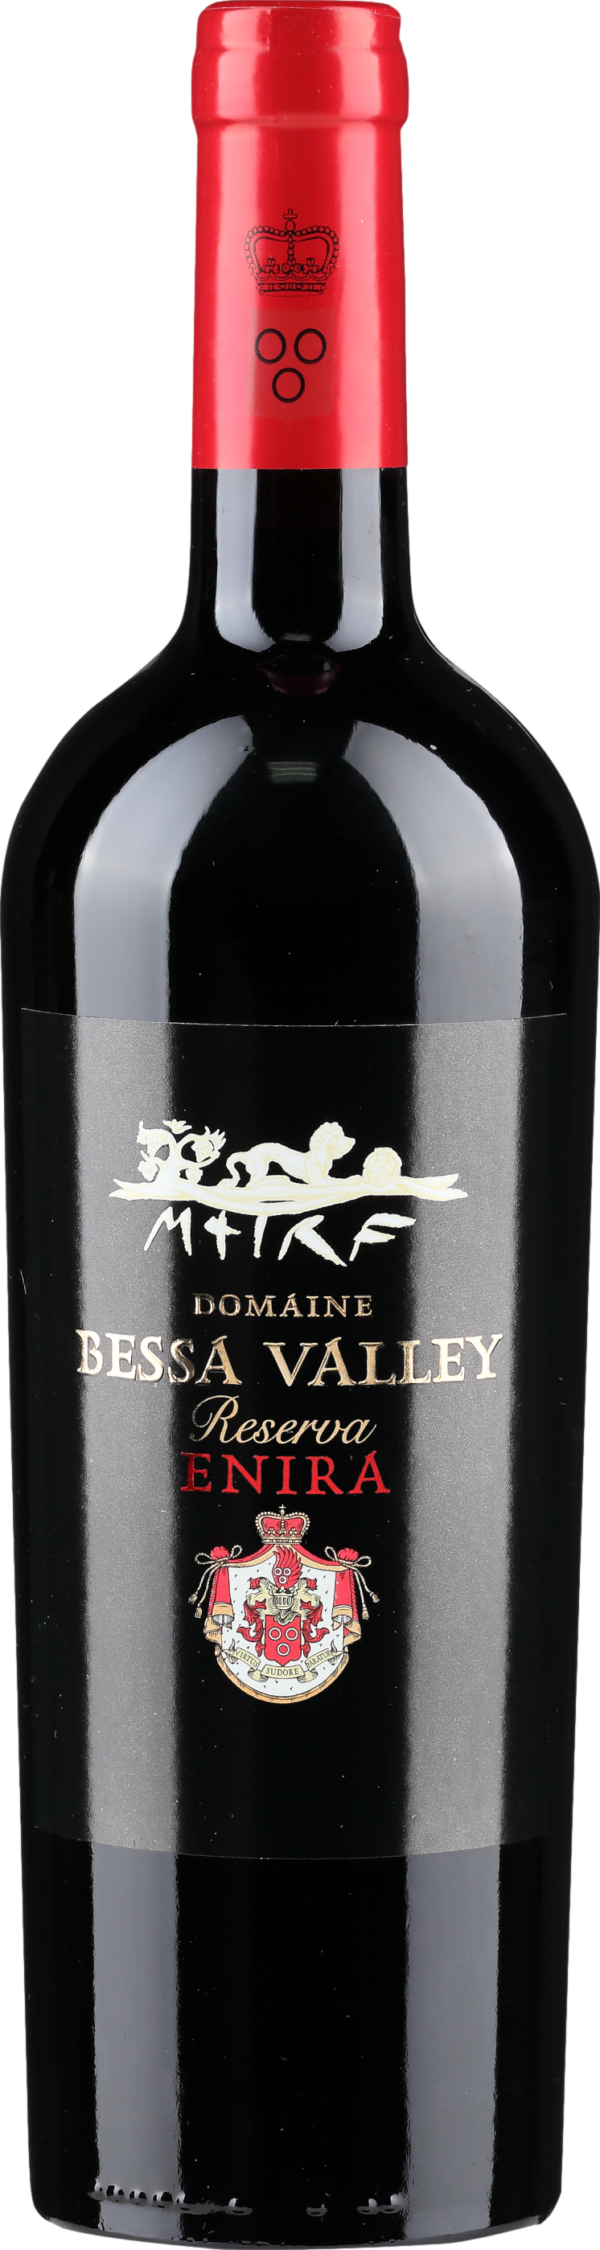 Product image of Bessa Valley Enira Reserva 2018 from 8wines